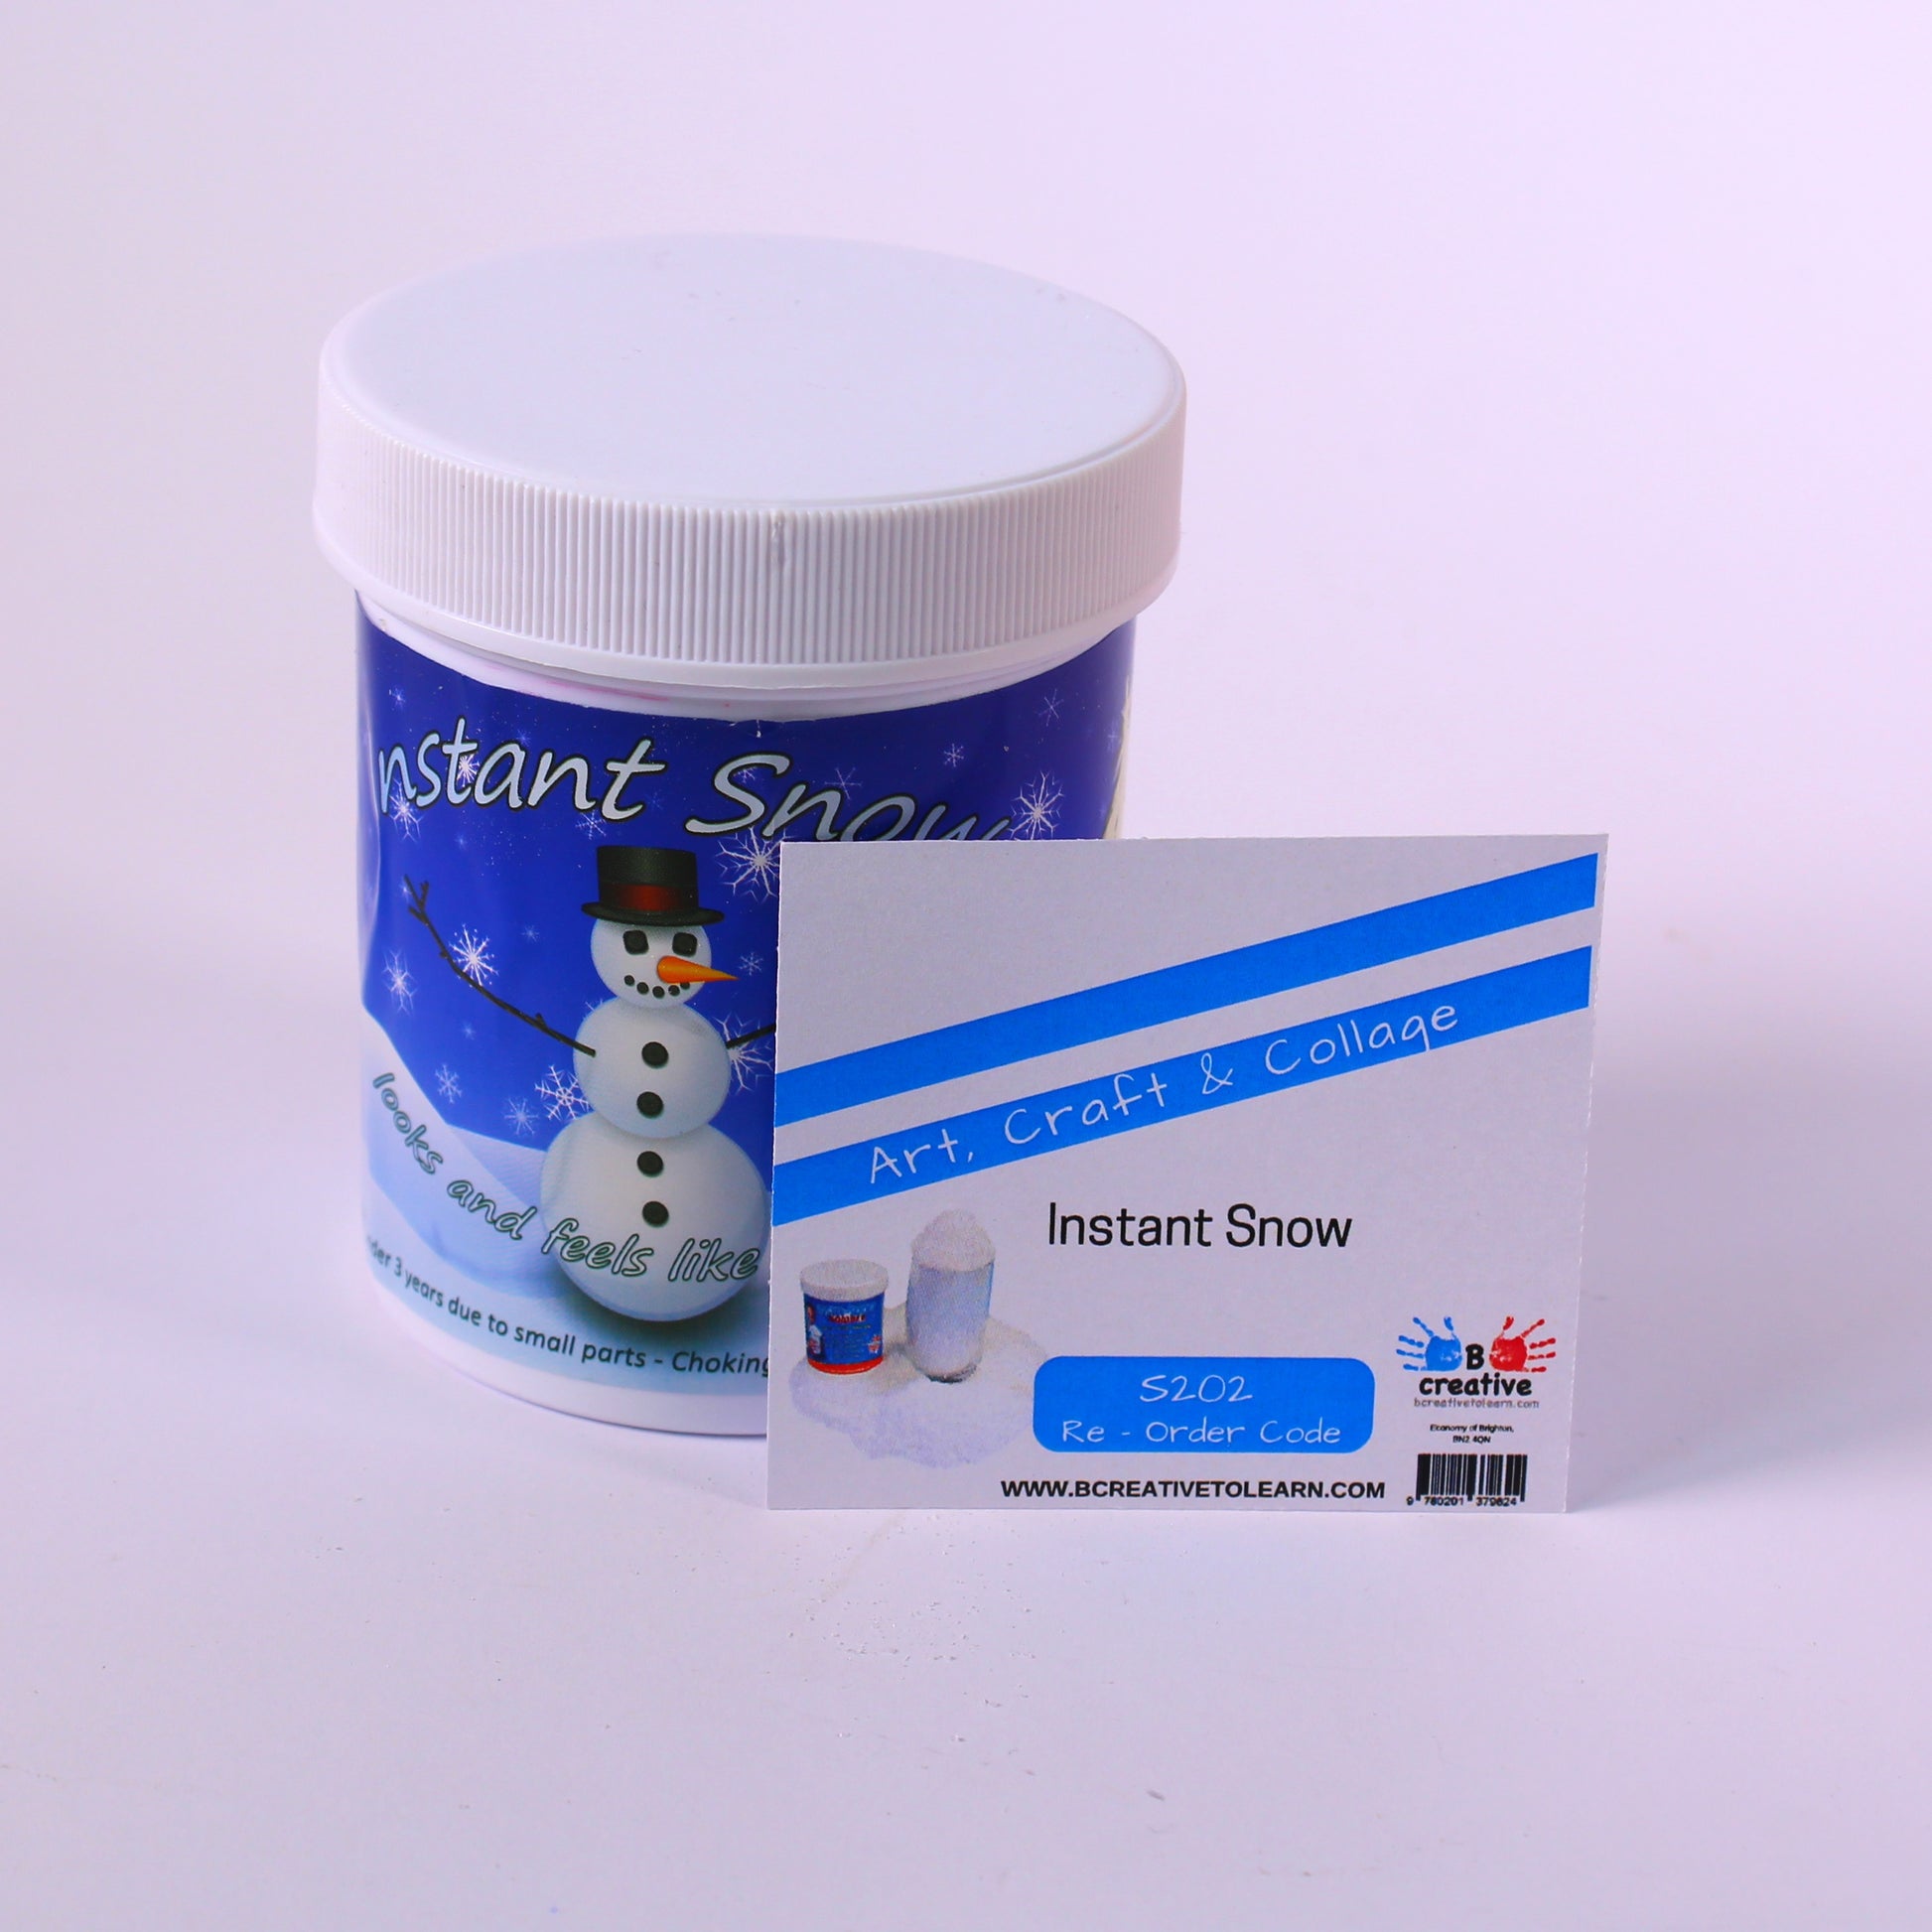 100g Pack of Instant Snow Powder